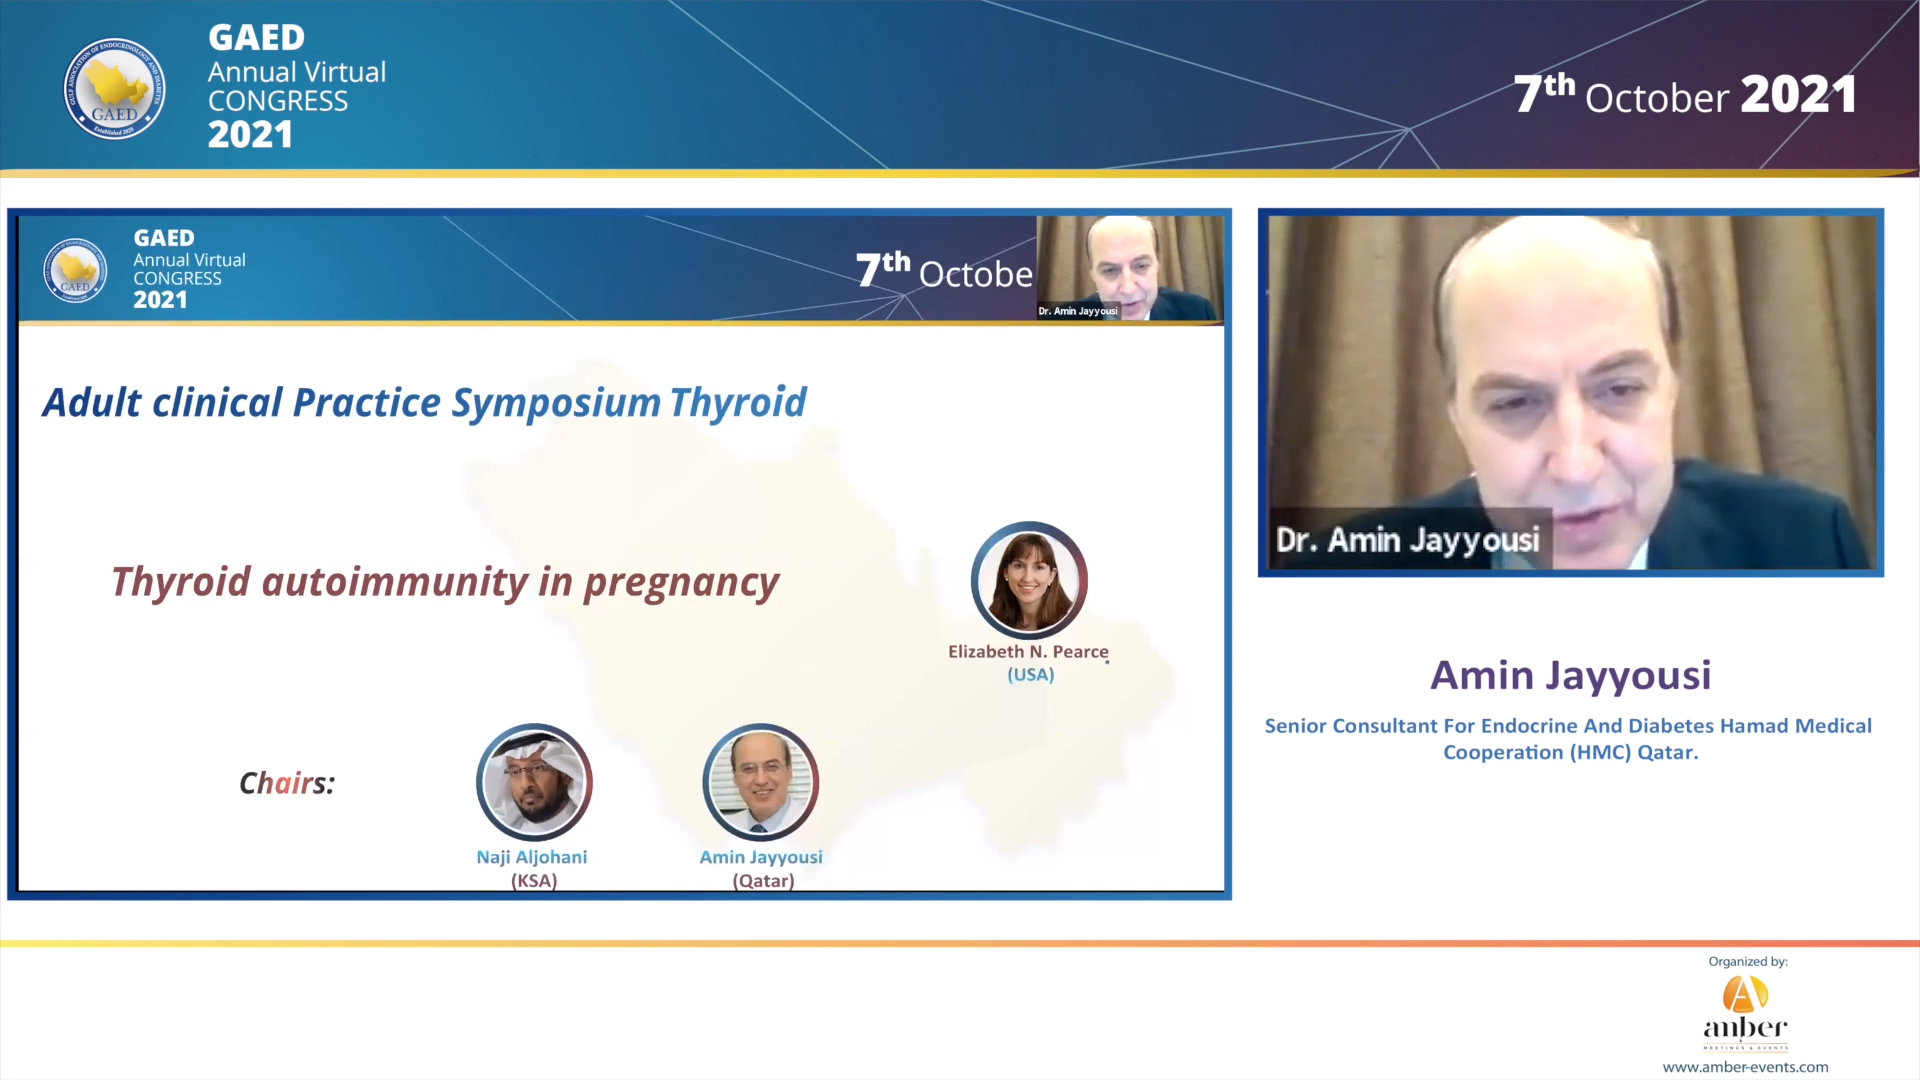 7.10.21 - Day 1, Adult - clinical Practice Symposium Thyroid